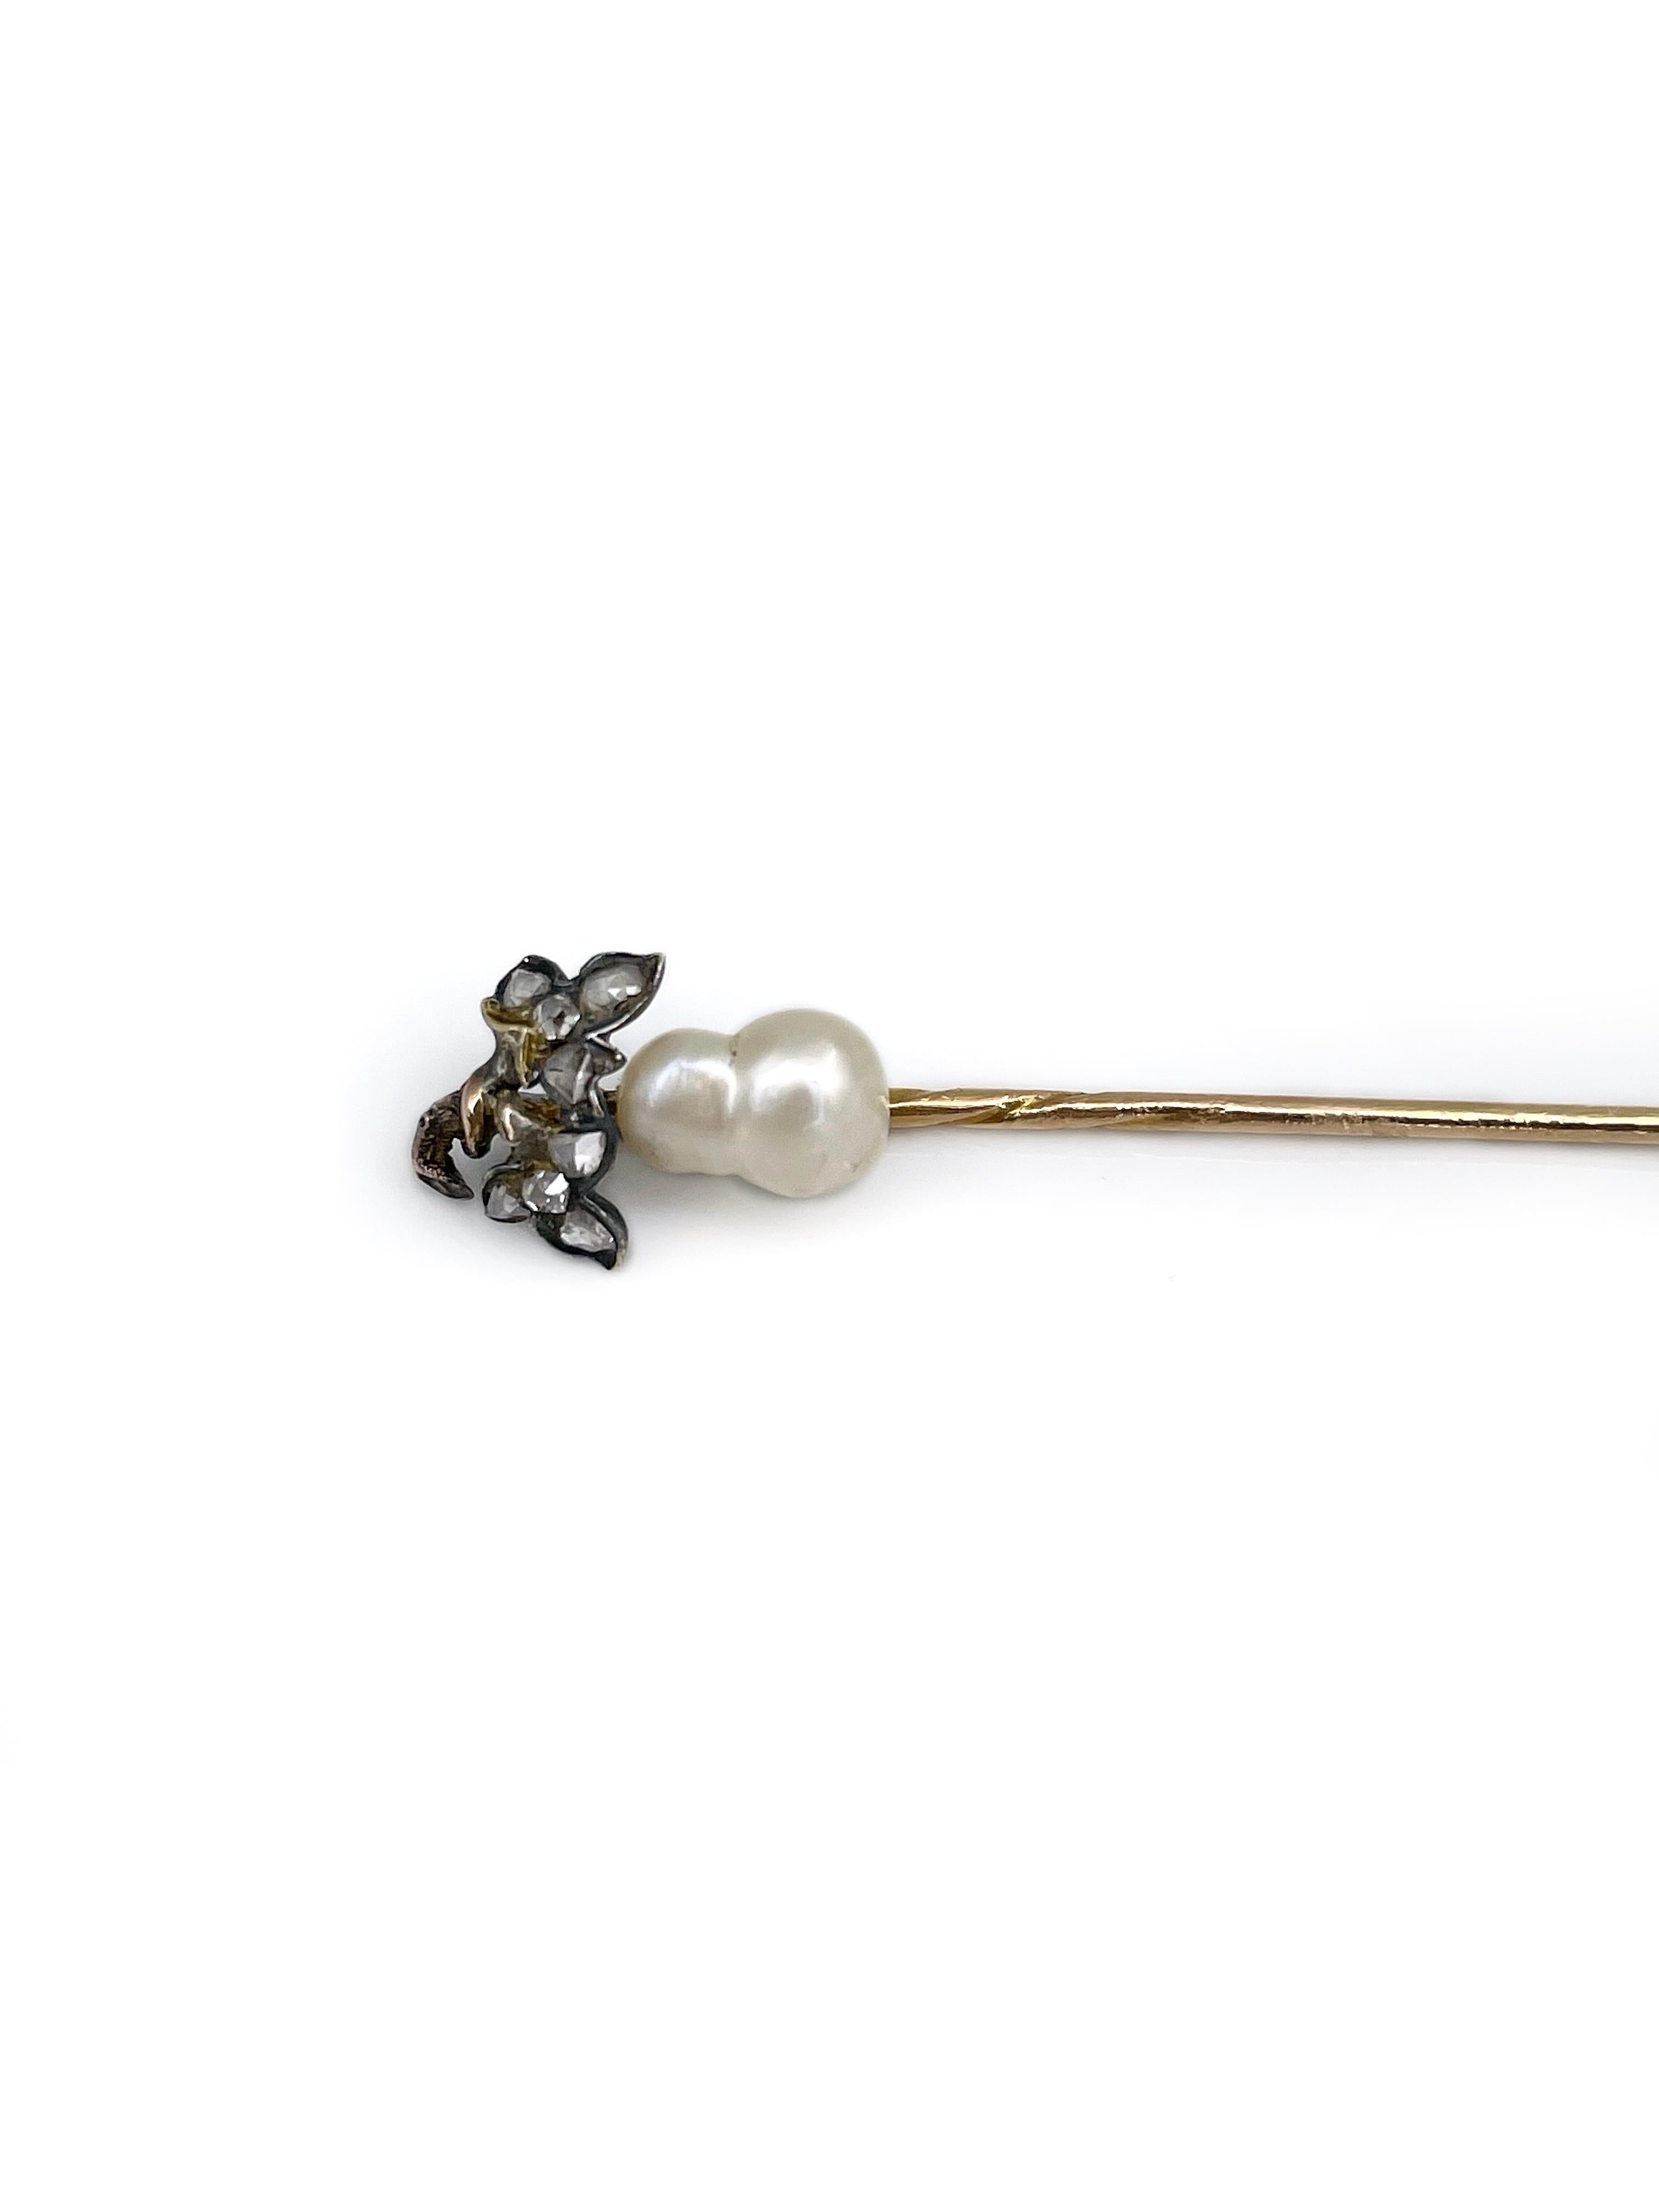 This is a Victorian fruit stick pin brooch crafted in 18K yellow gold. The piece features a pearl and 8 rose cut diamonds.

Rare find and highly collectable.

Weight: 1.94g
Length: 7cm
Detail length: 1.5cm

———

If you have any questions, please